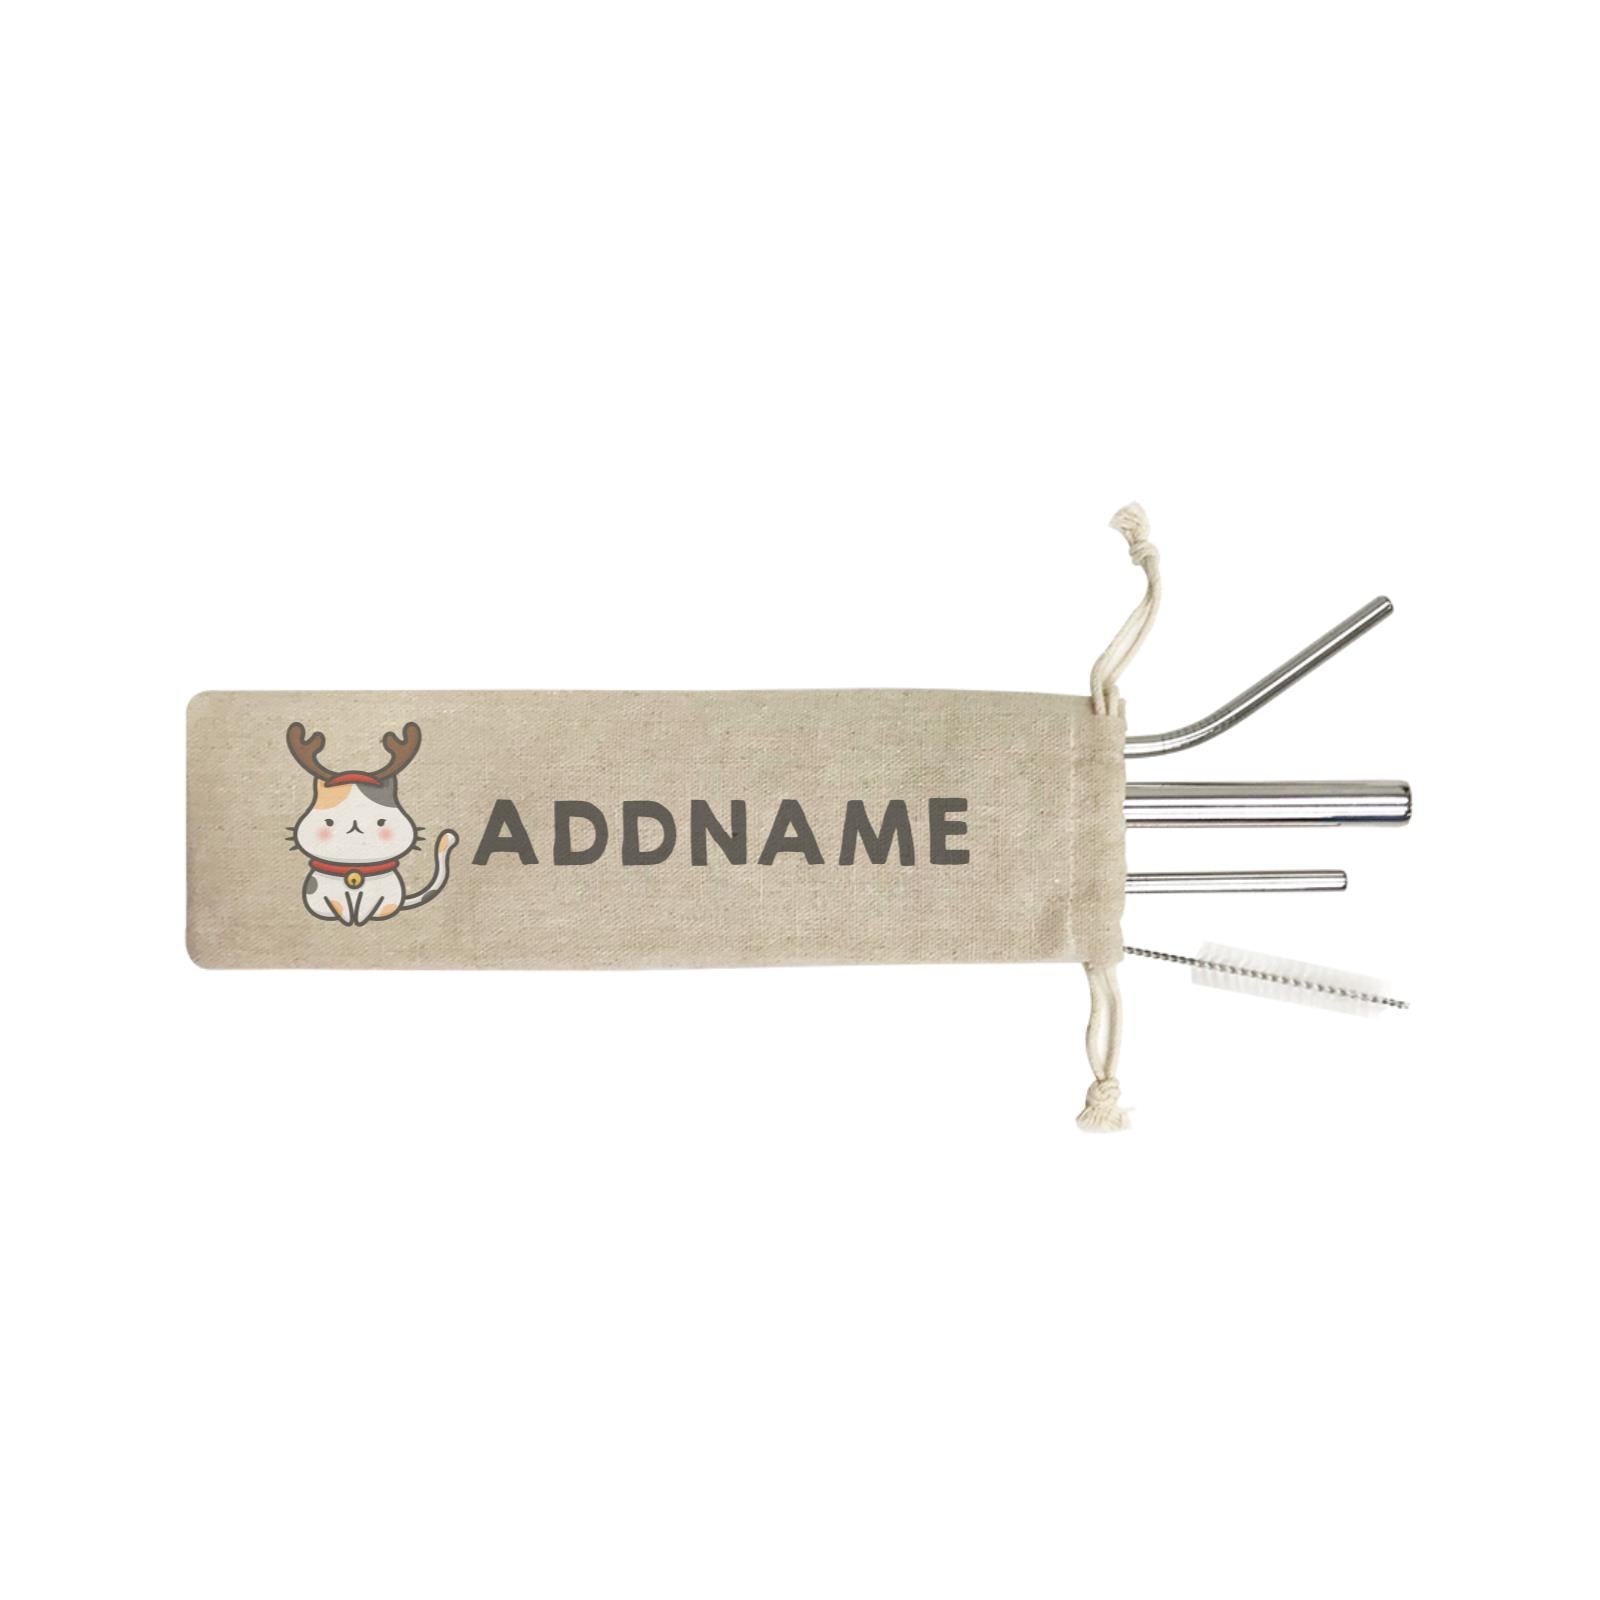 Xmas Cute Cat With Reindeer Antlers Addname SB 4-in-1 Stainless Steel Straw Set In a Satchel